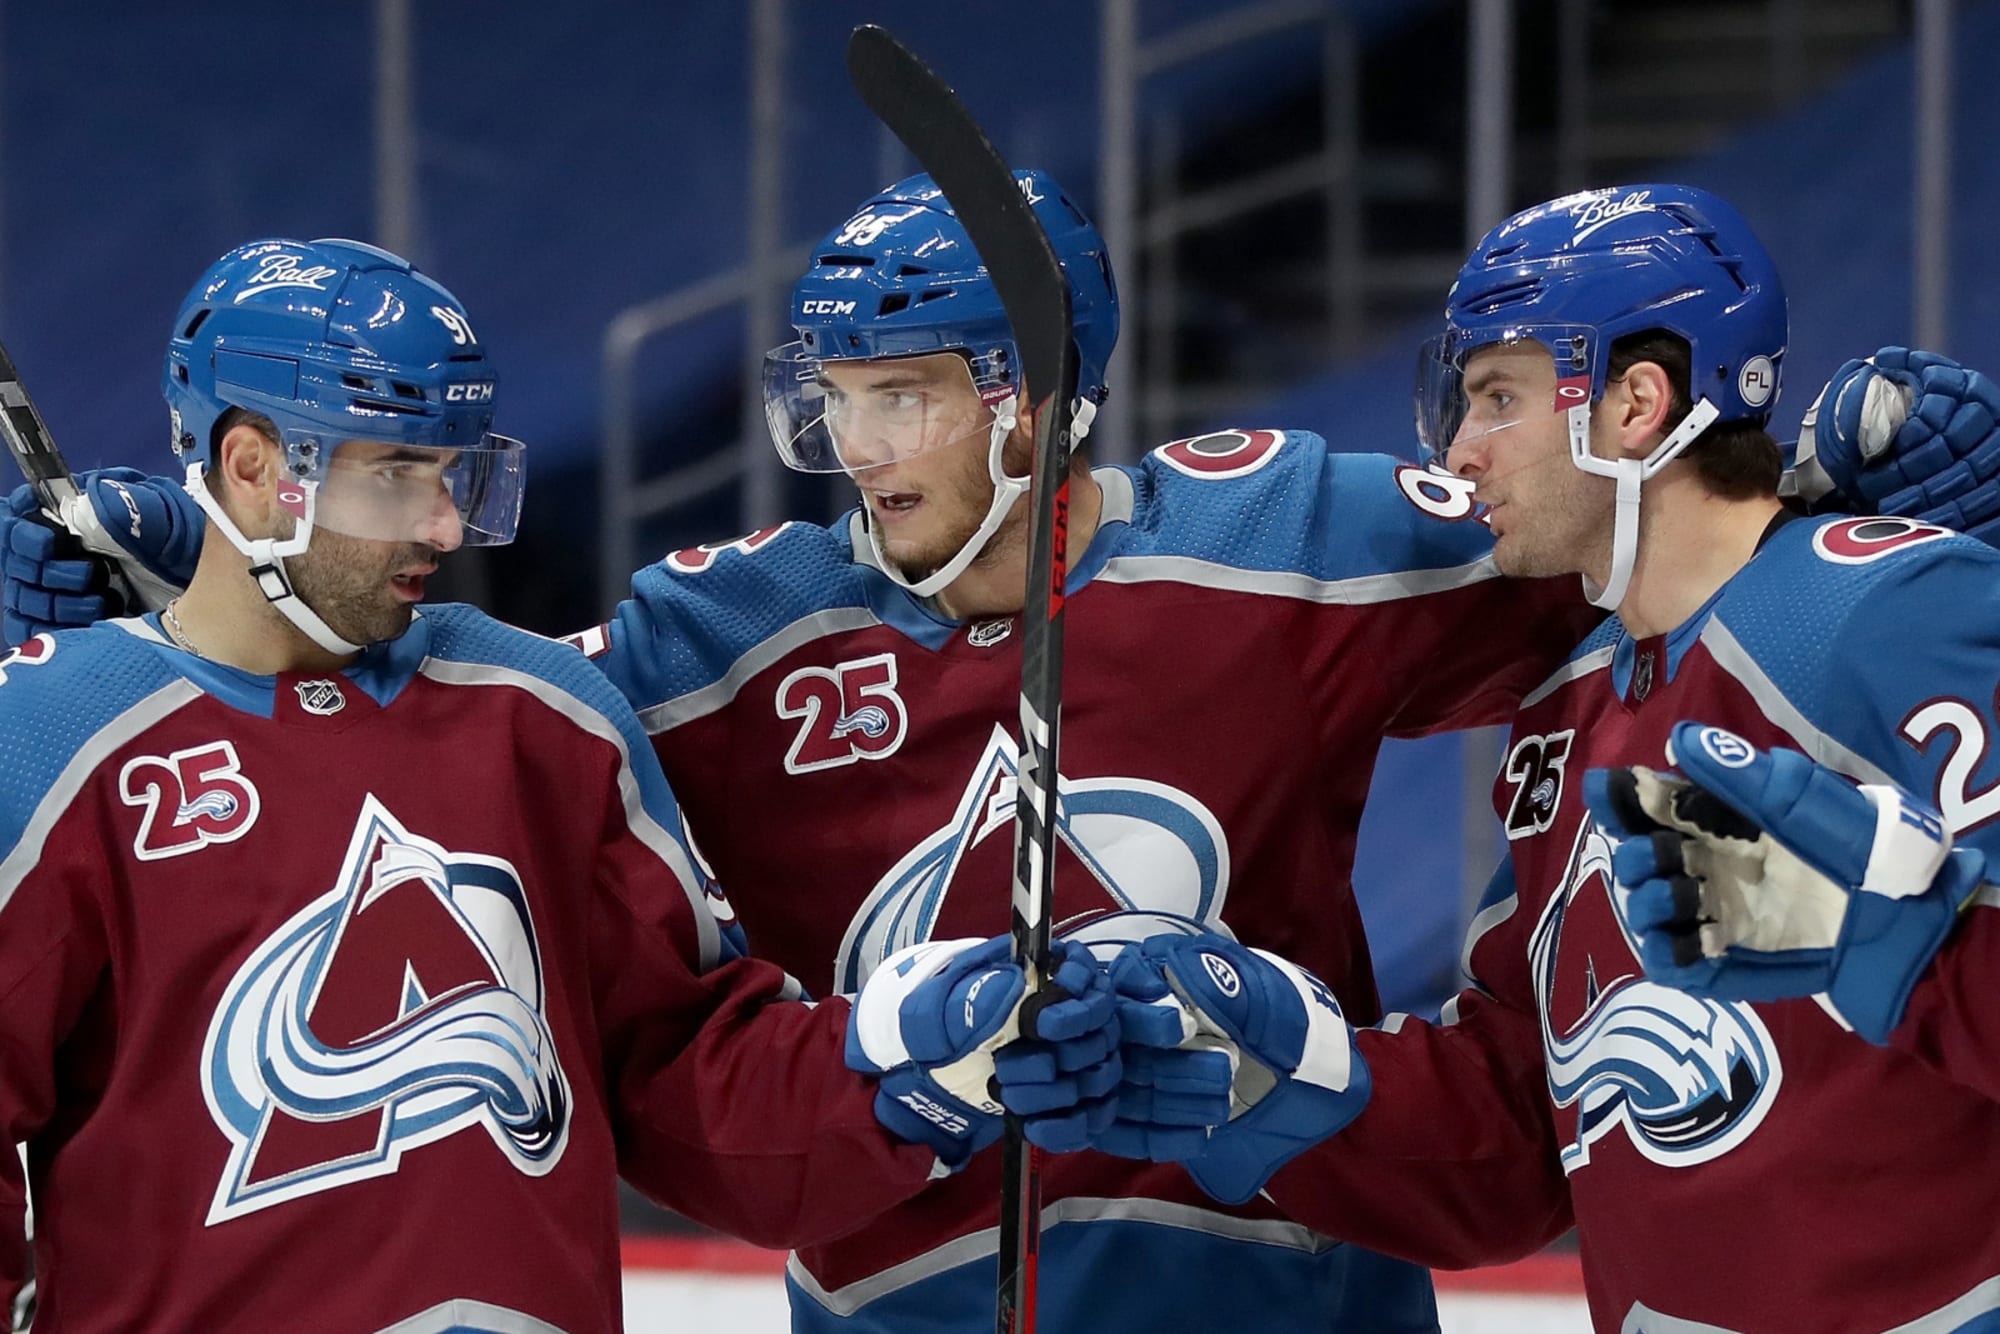 Thursday Night S Victory Is Why The Nhl Should Fear The Colorado Avalanche